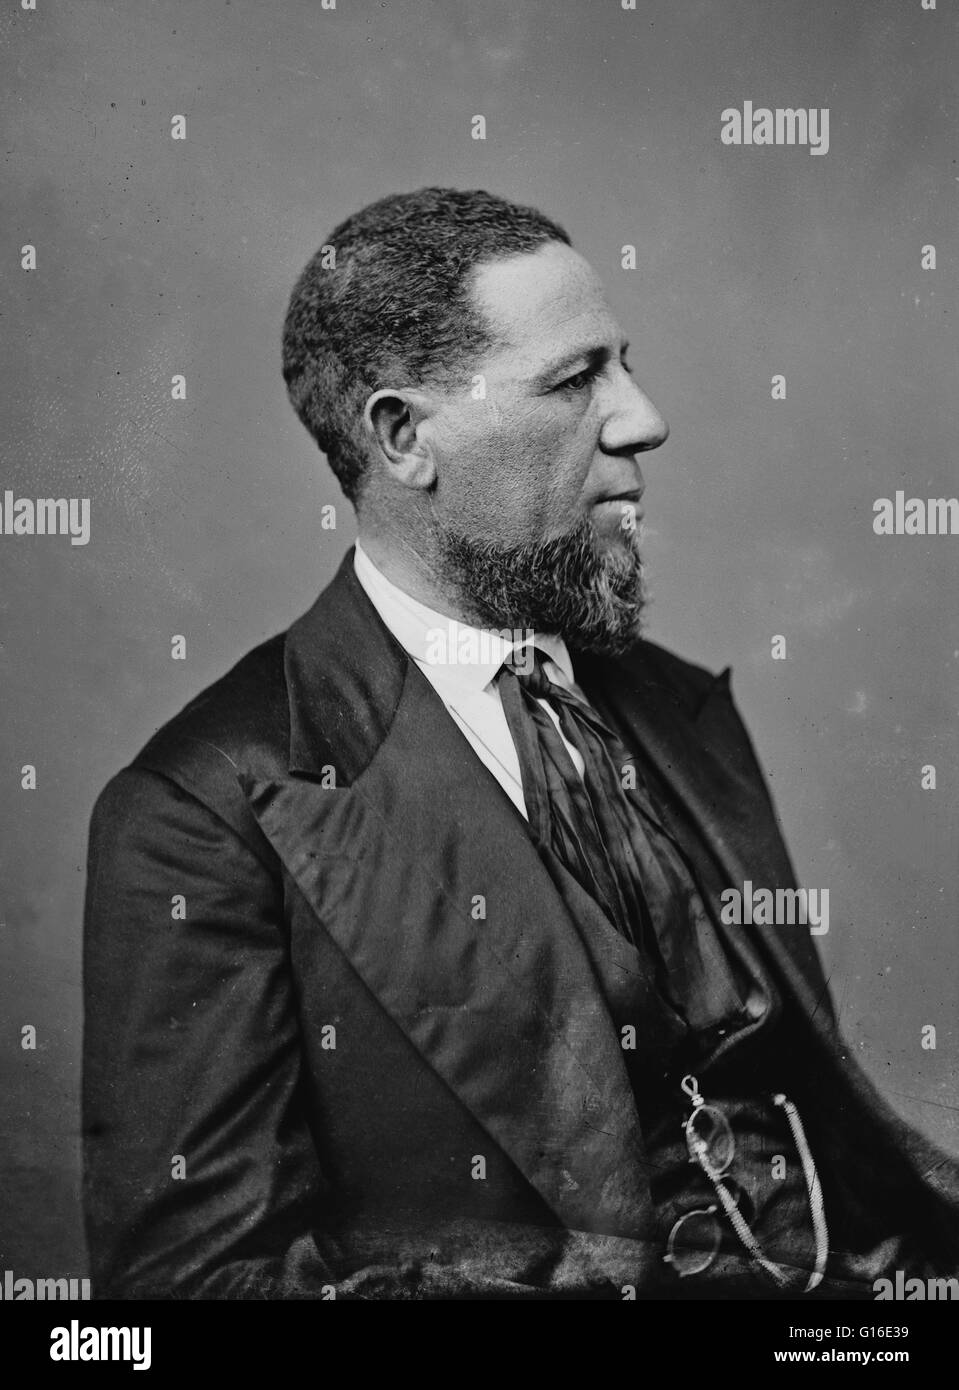 Entitled: 'Hiram R. Revels of Mississippi' African-American legislator. Hiram Rhodes Revels (September 27, 1827 - January 16, 1901) was the first non-white to serve in the United States Senate. He was ordained a minister in 1845 and helped raise two black Stock Photo